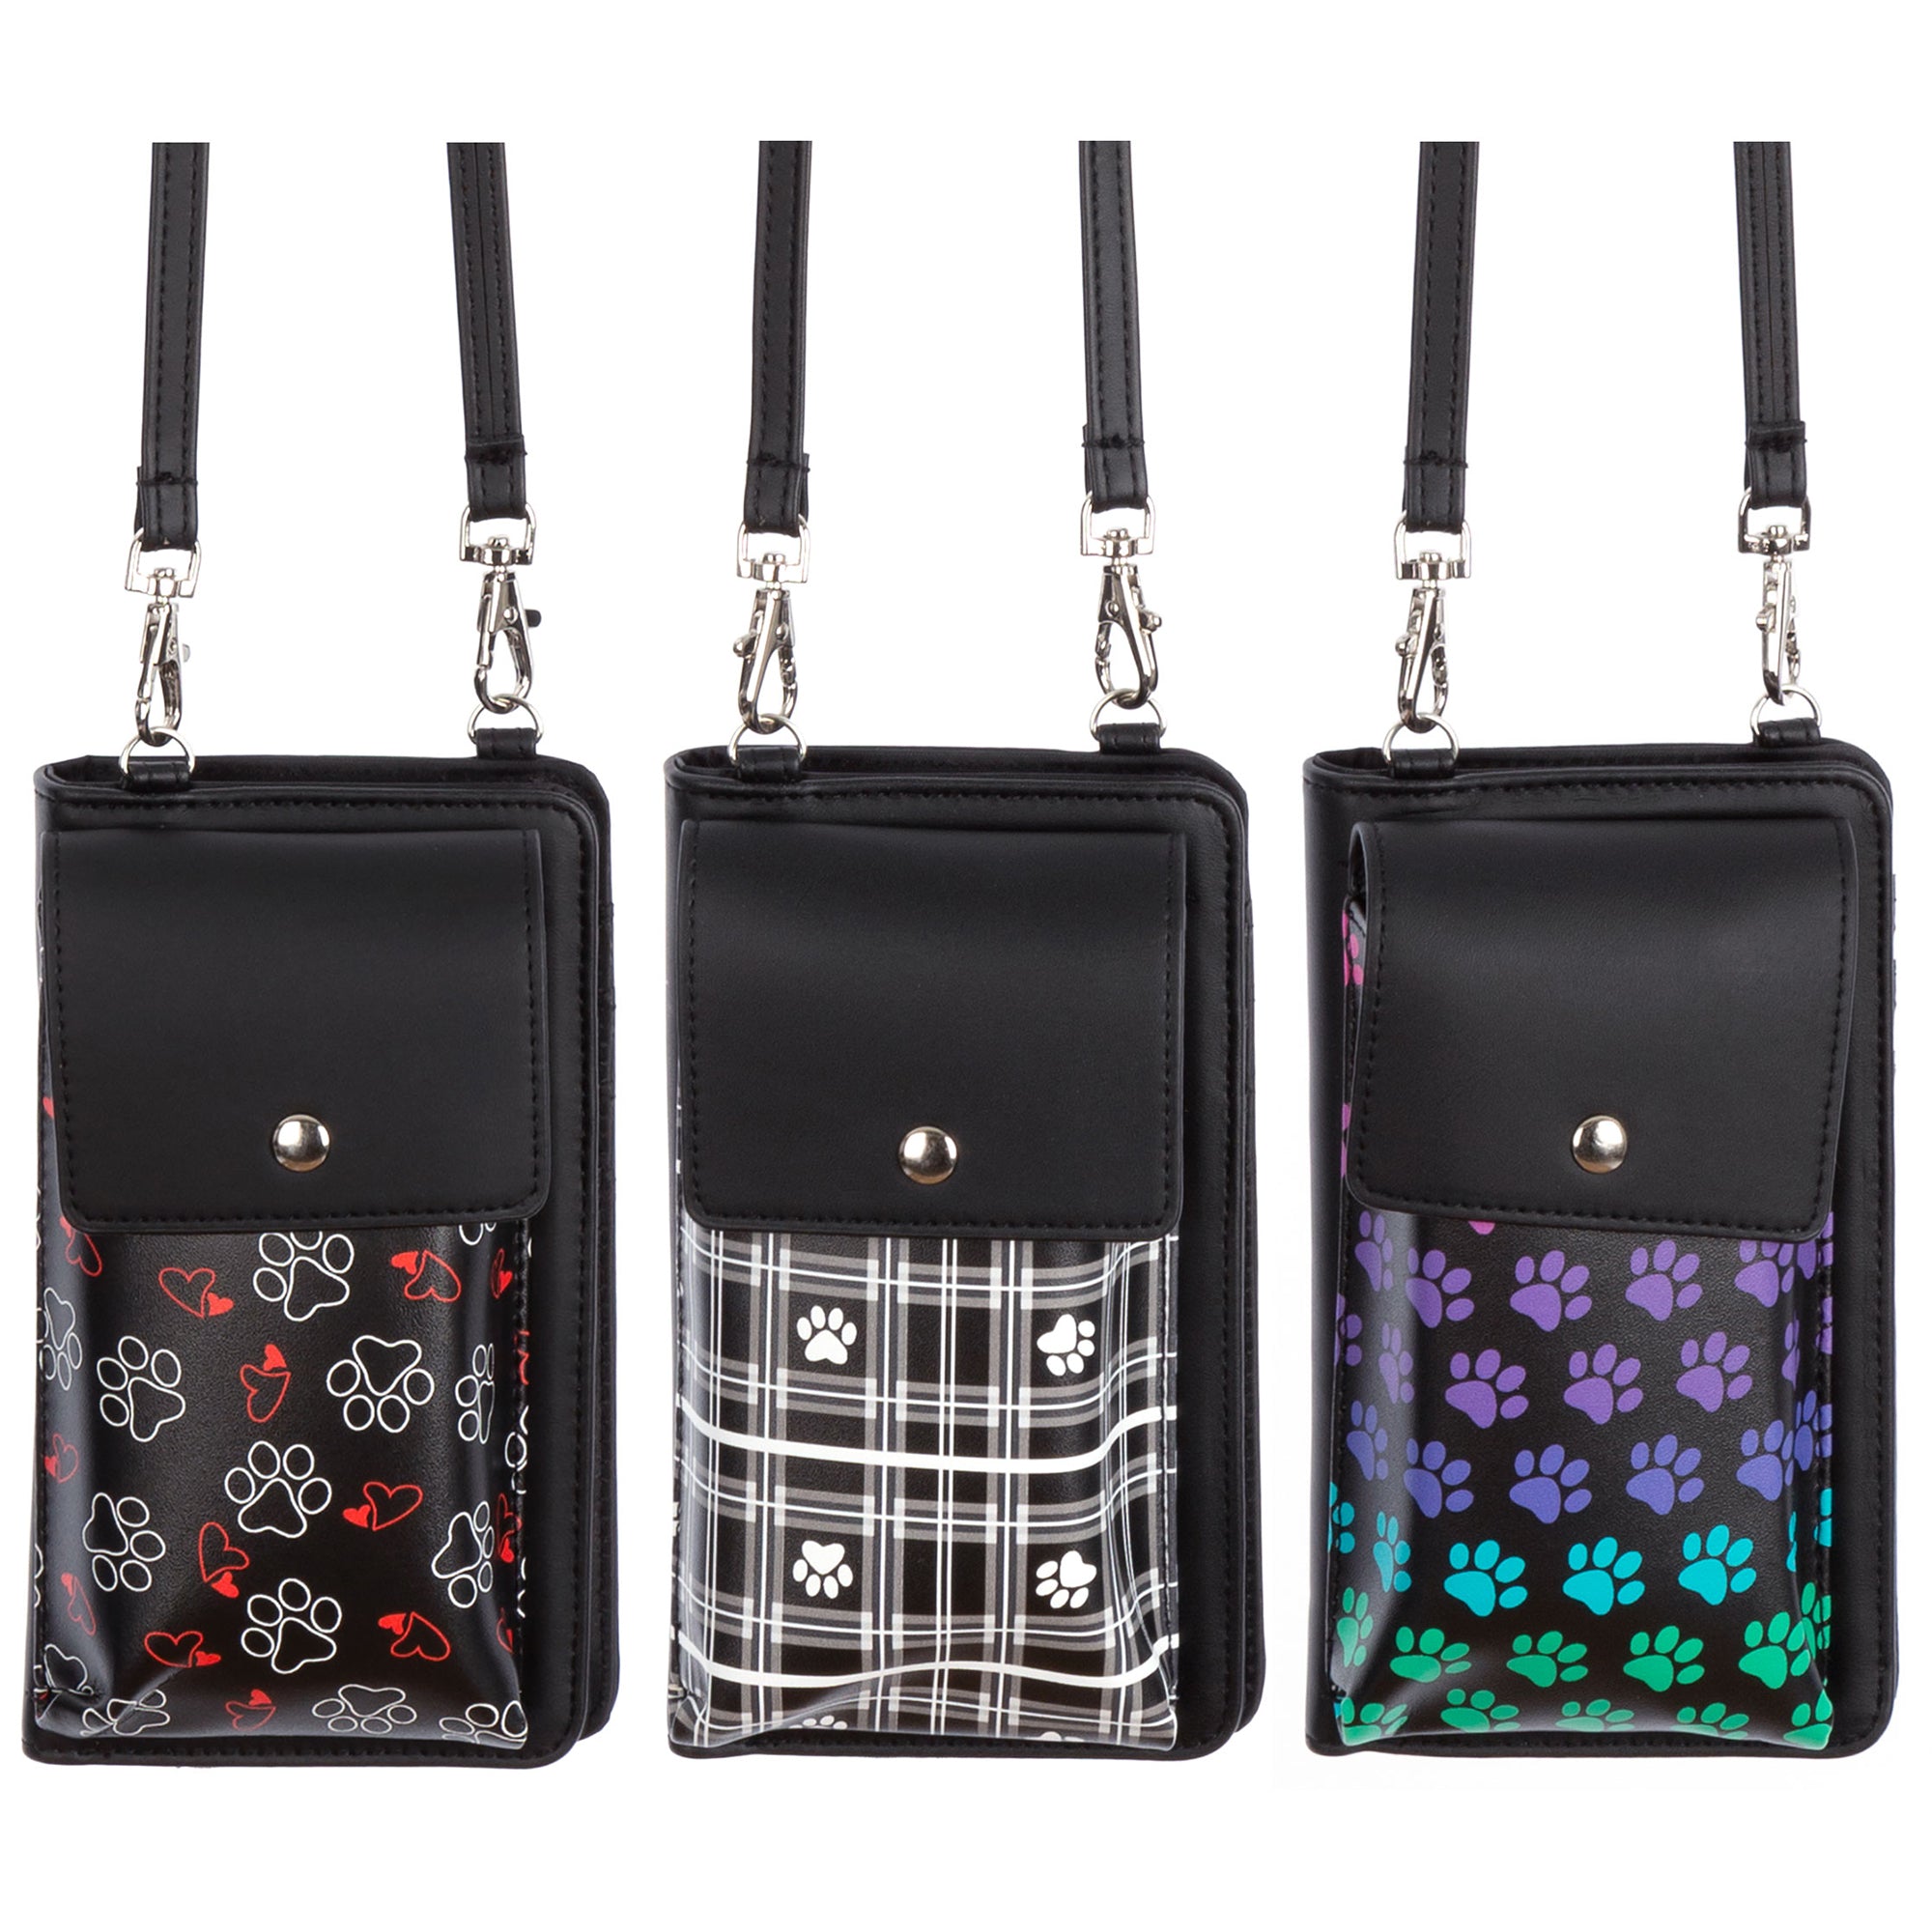 Pawfect Size Crossbody Wallet - Plaid With Paws